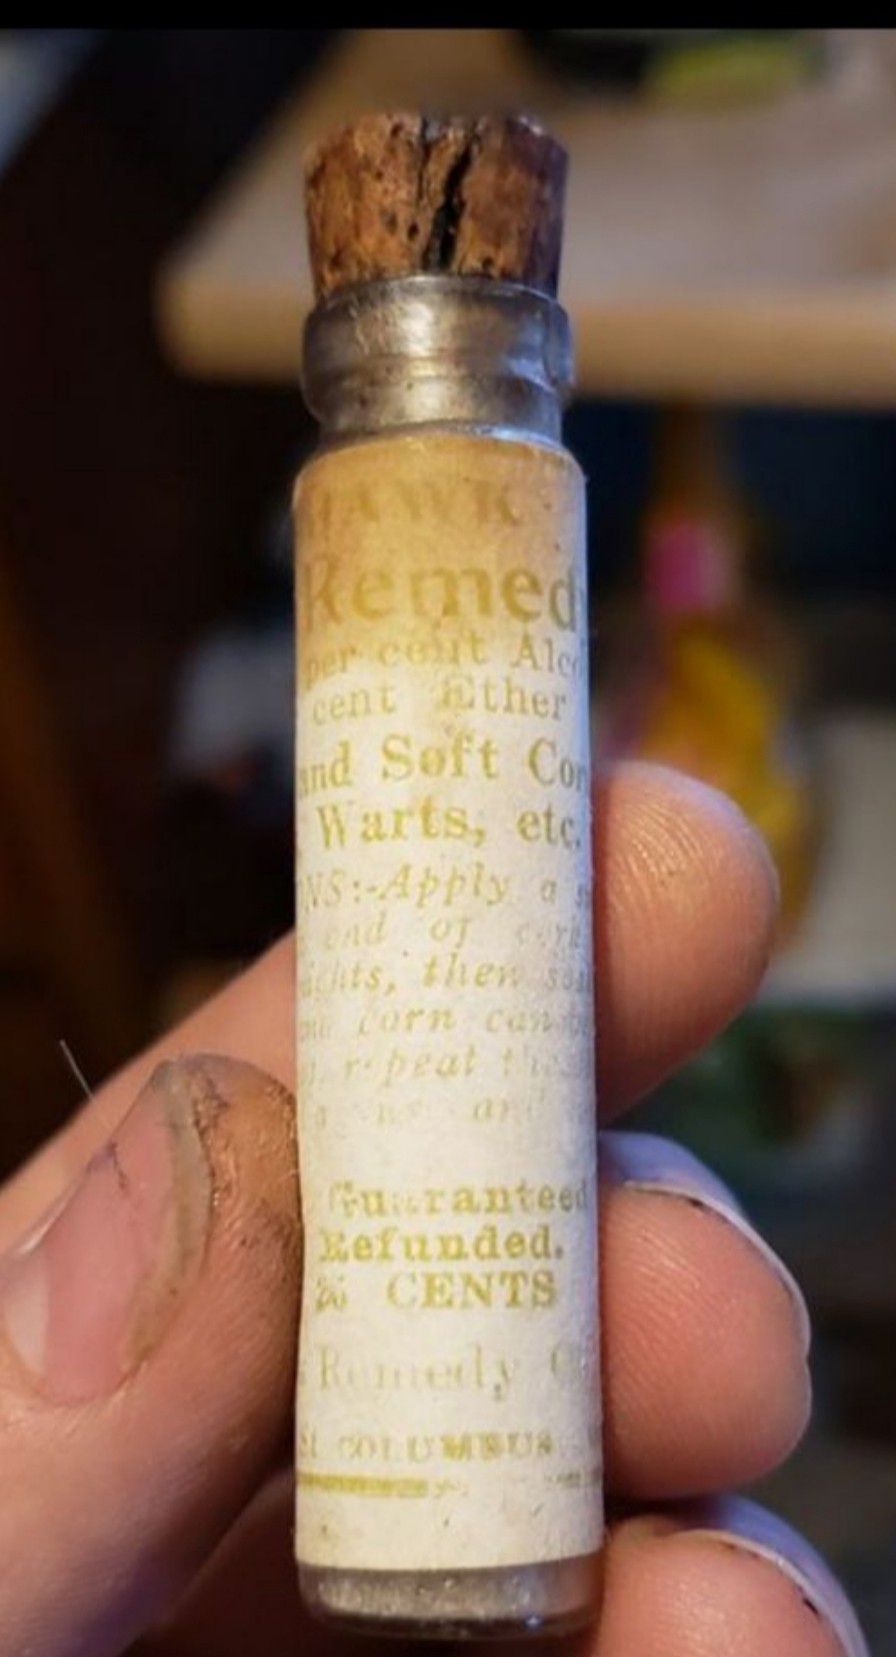 Antique Corn Remedy bottle (Columbus Ohio) EVERYTHING IS ON SALE ASK FOR DETAILS